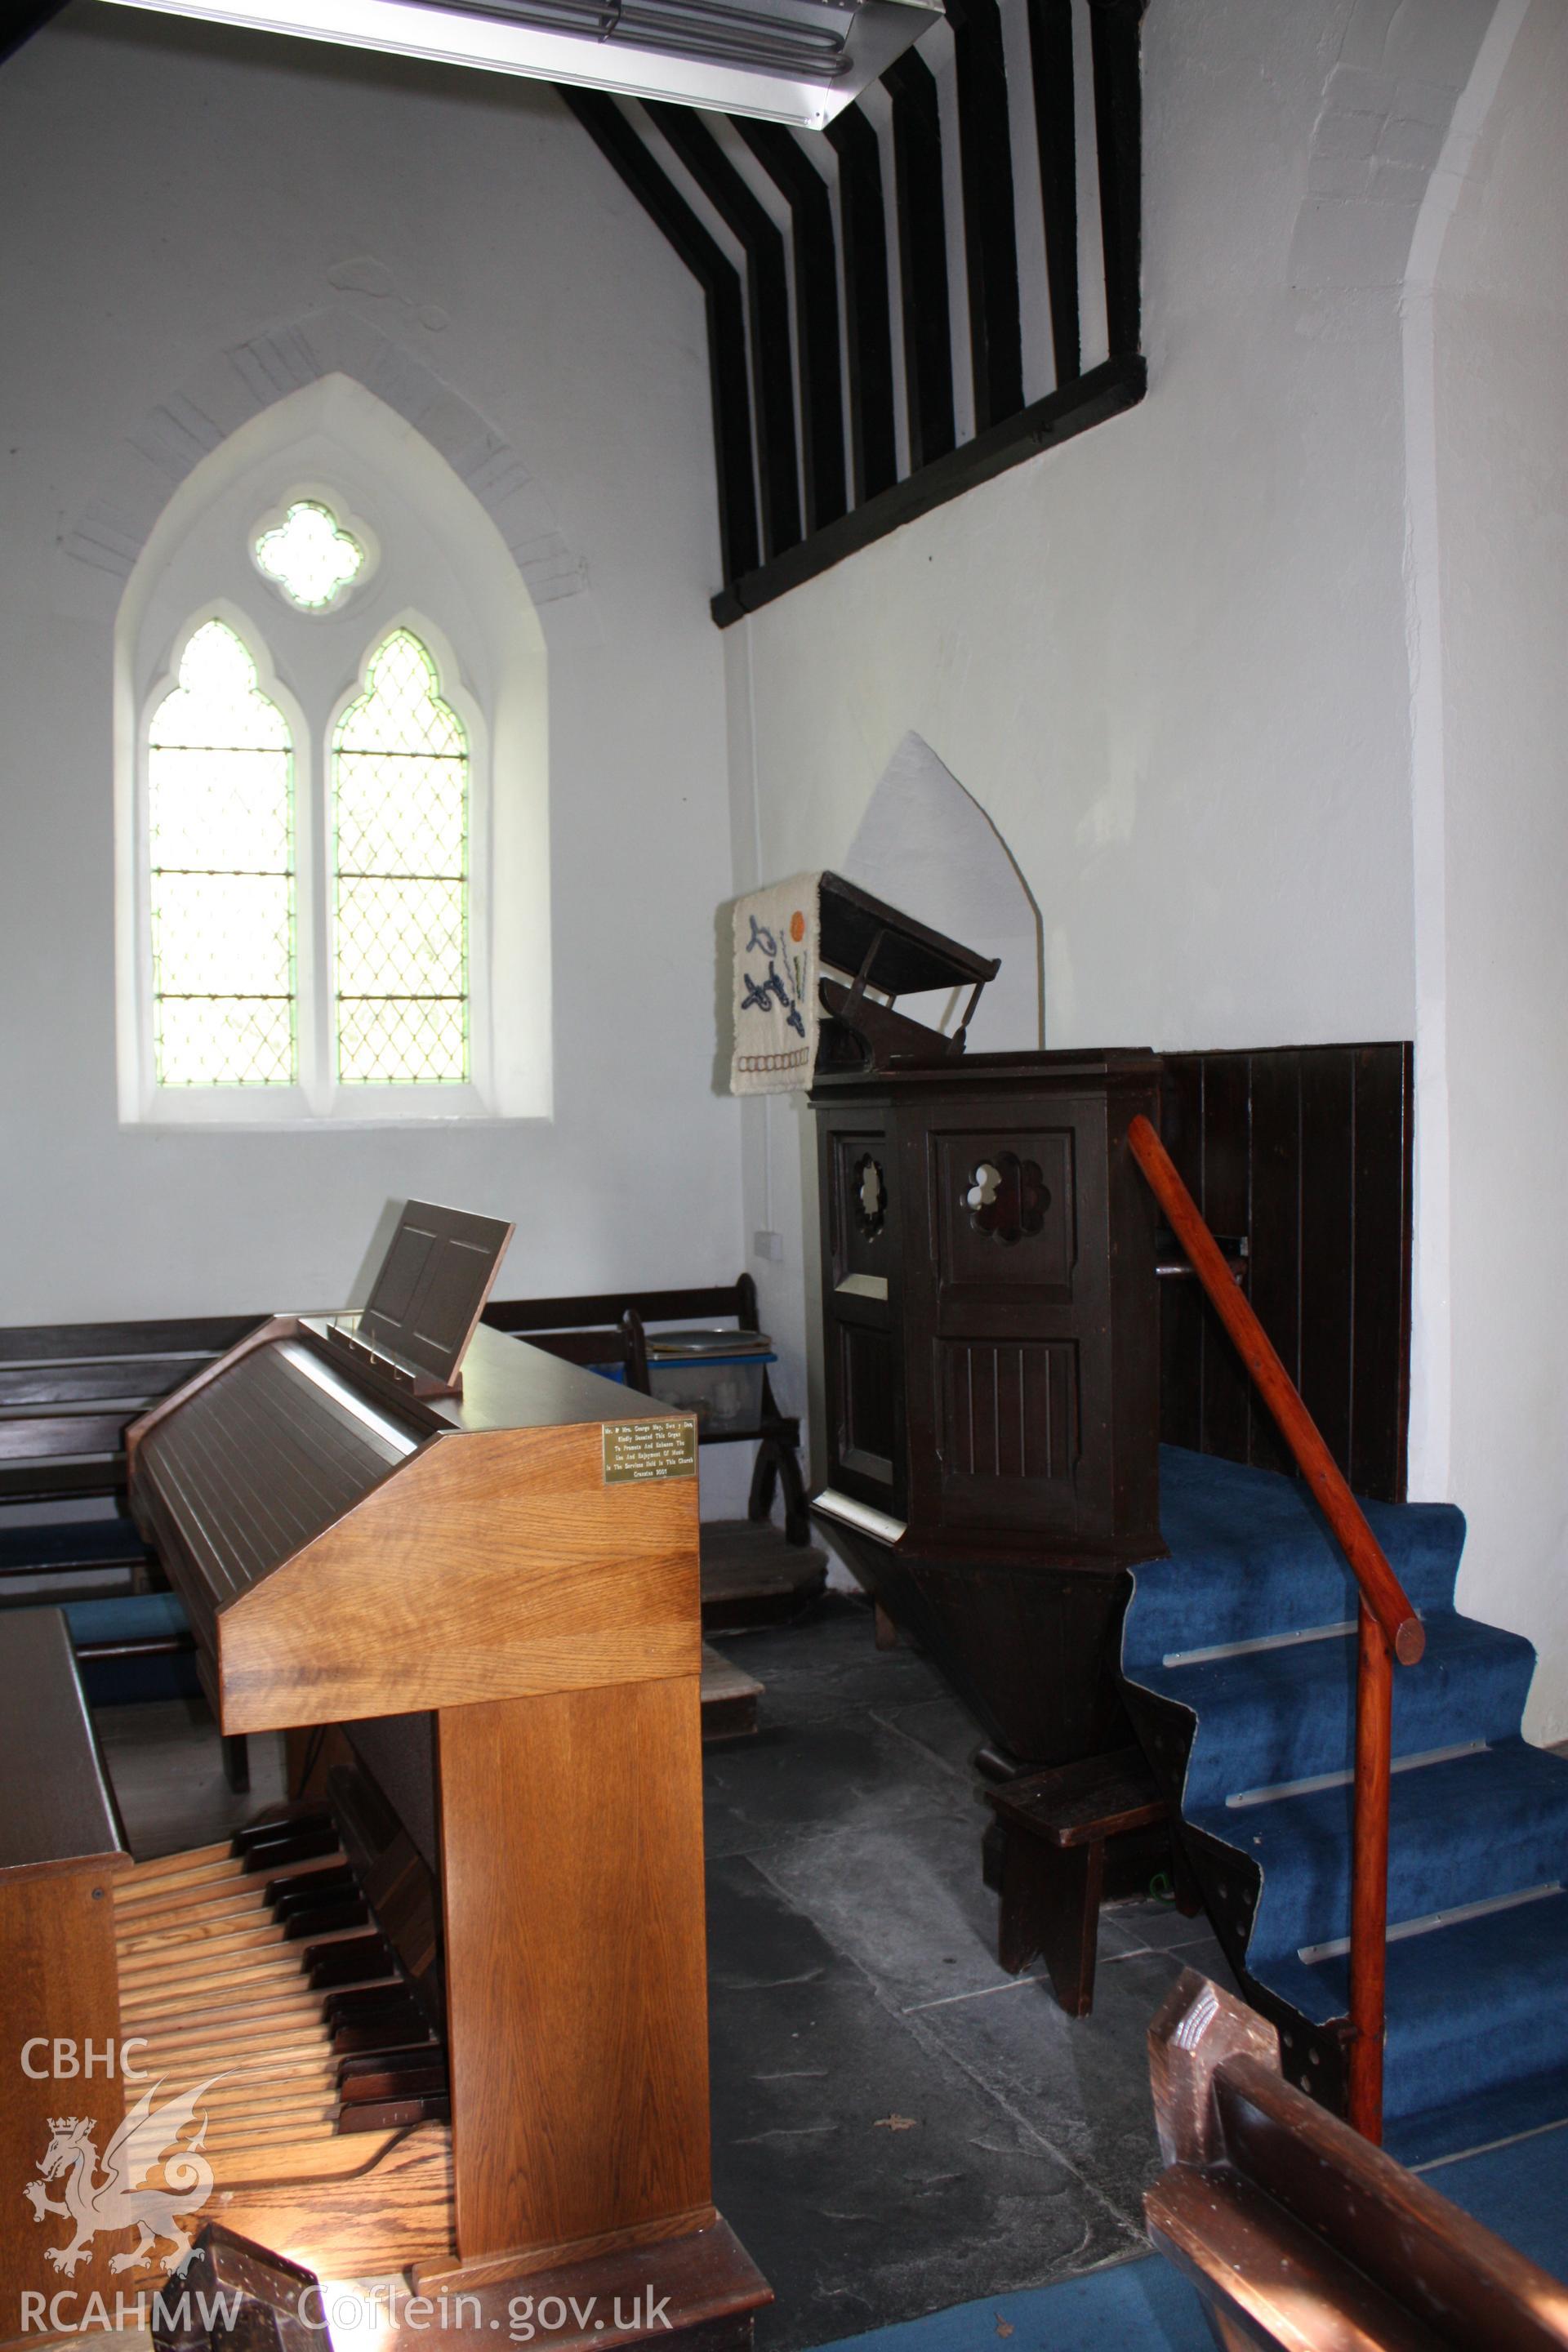 Pulpit in the extension in the northern wall